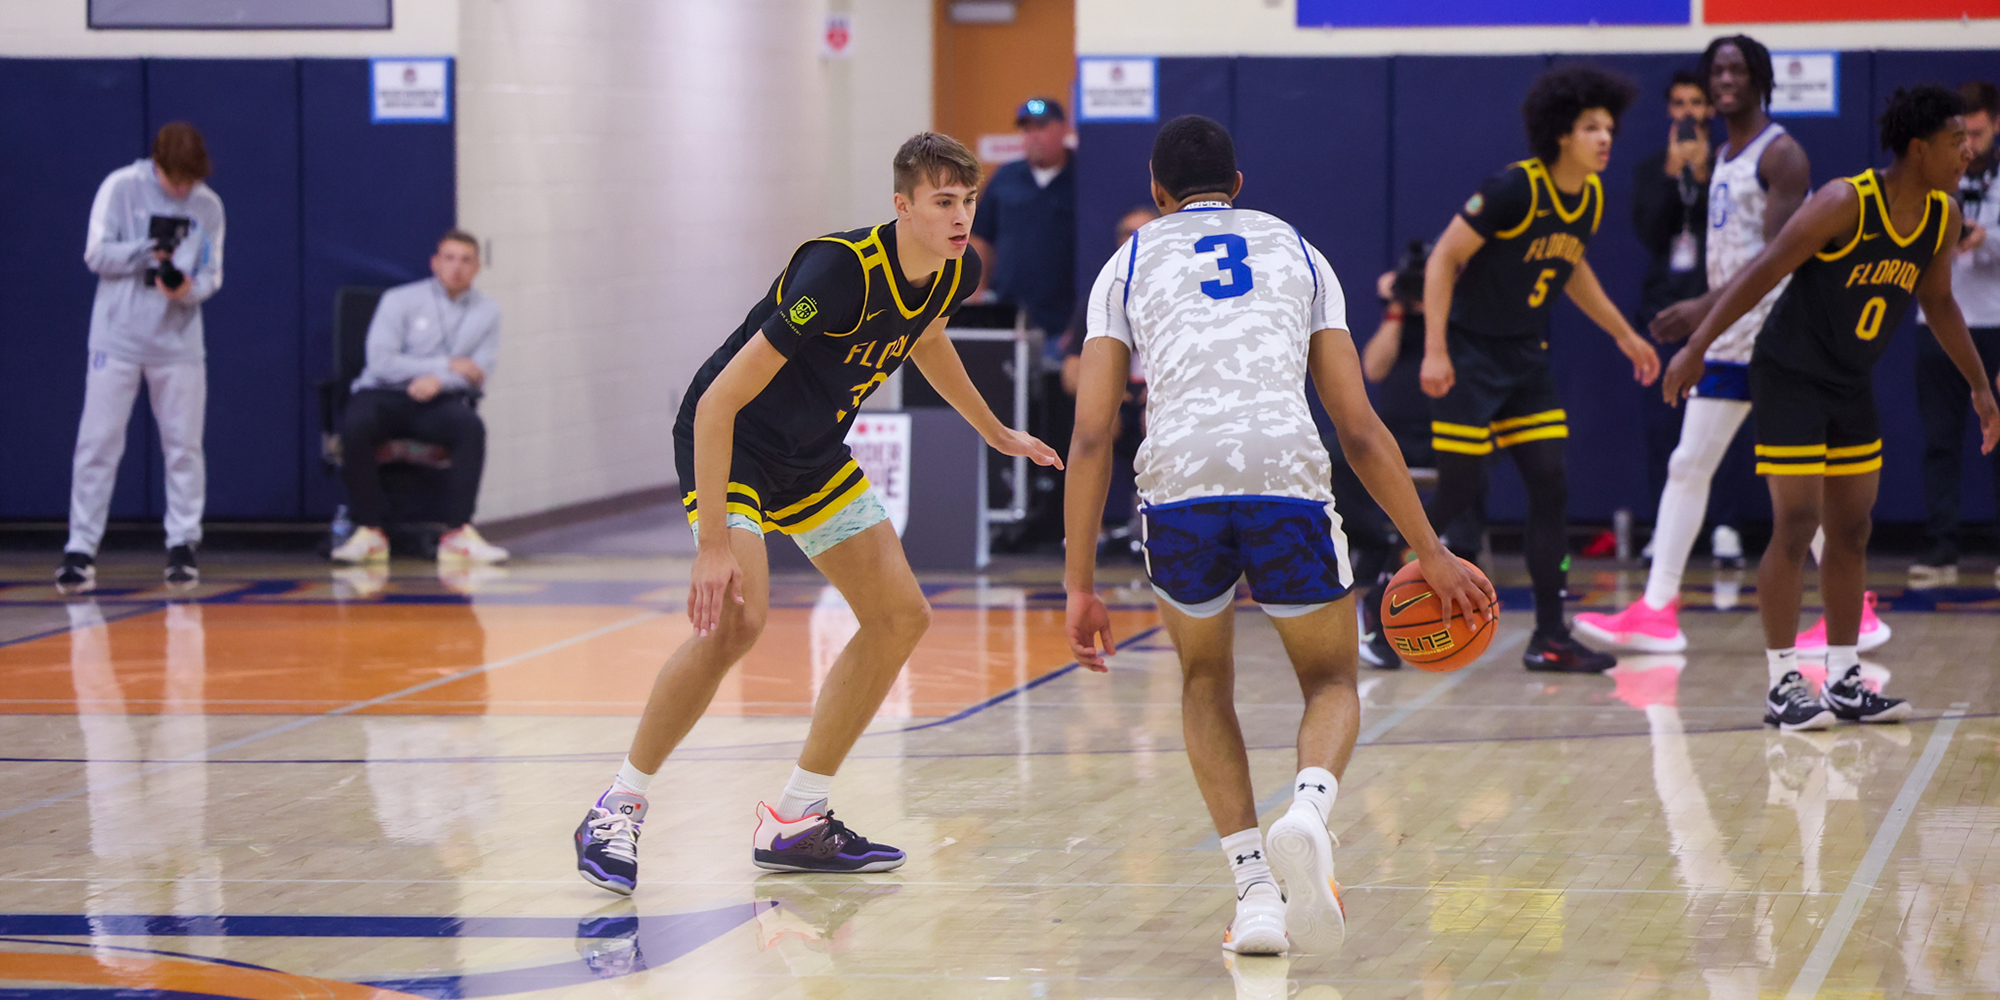 Florida Eagles forward Cooper Flagg guards a fellow five-star recruit, Bishop O’Connell’s Bryson Tucker, in their first round matchup at the Top Flight Invite at Border League at Bishop Gorman High School in Las Vegas on Oct. 13. (Photo by Griffin Greenberg/Cronkite News)
